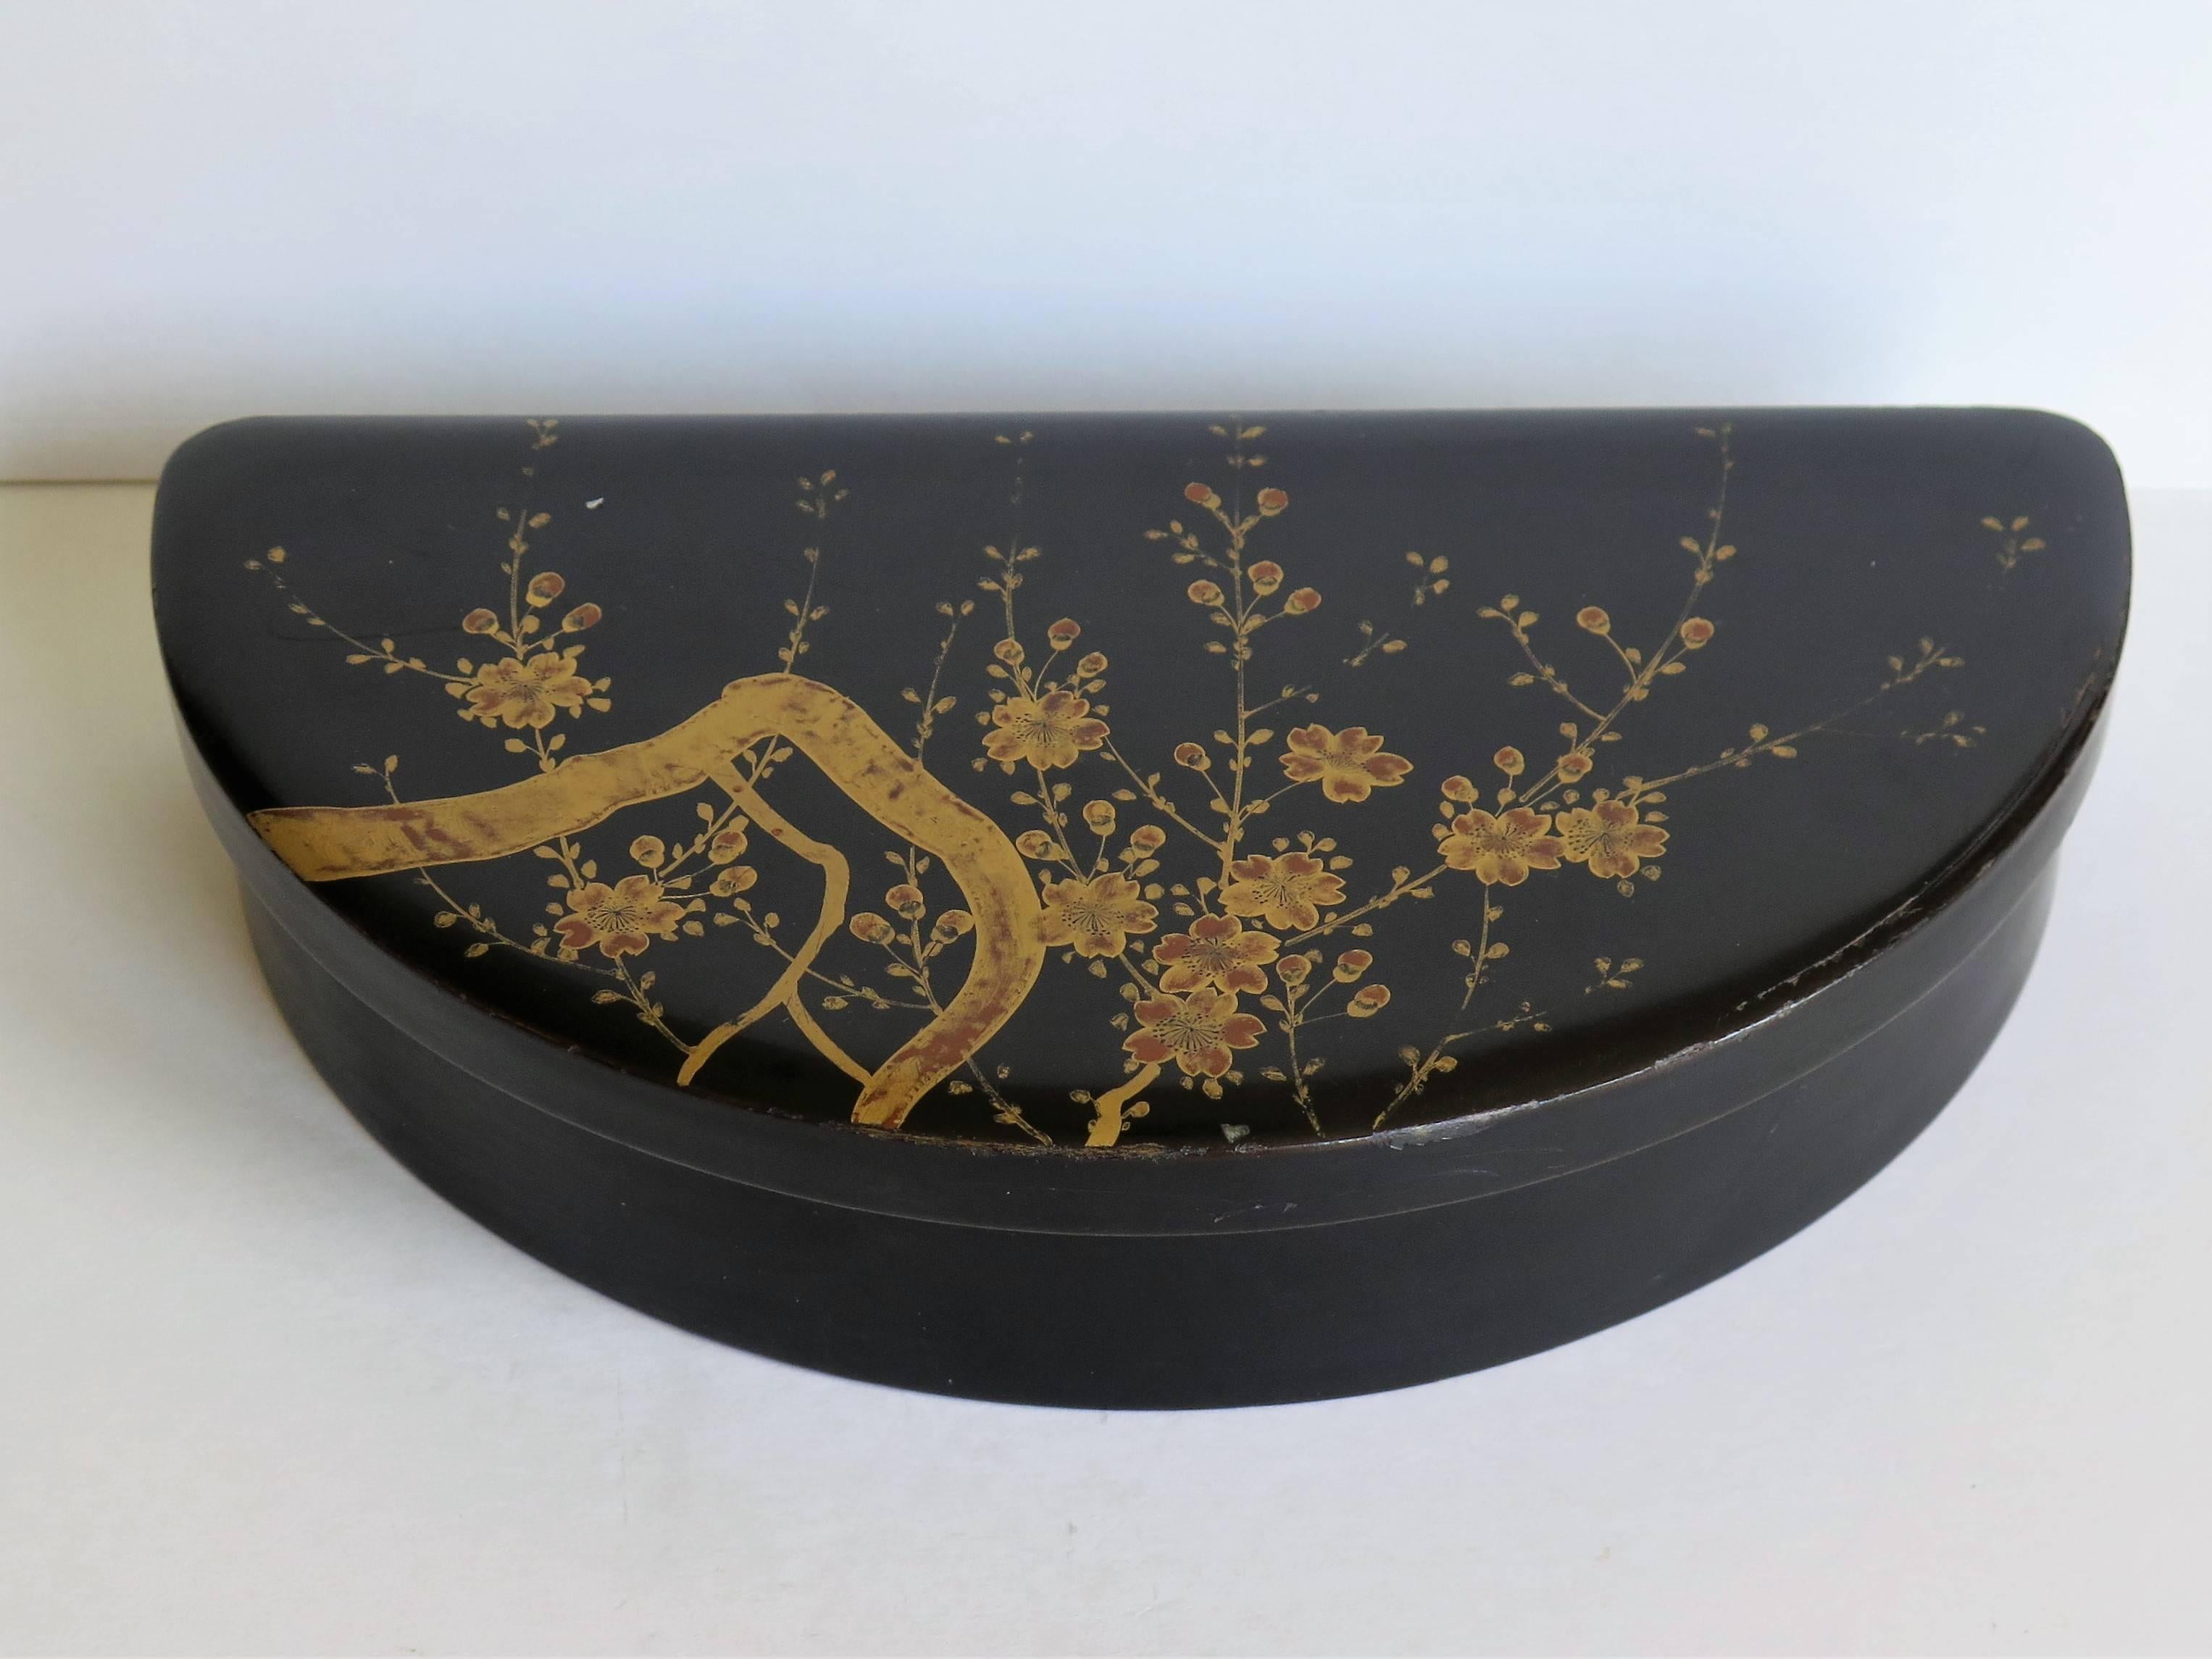 This is a beautiful papier mâché, lacquered box, which we attribute to being made in Japan during the early 20th century towards the end of the Meiji period, circa 1905. 

This is a very decorative lidded box with a semi circular shape and a very